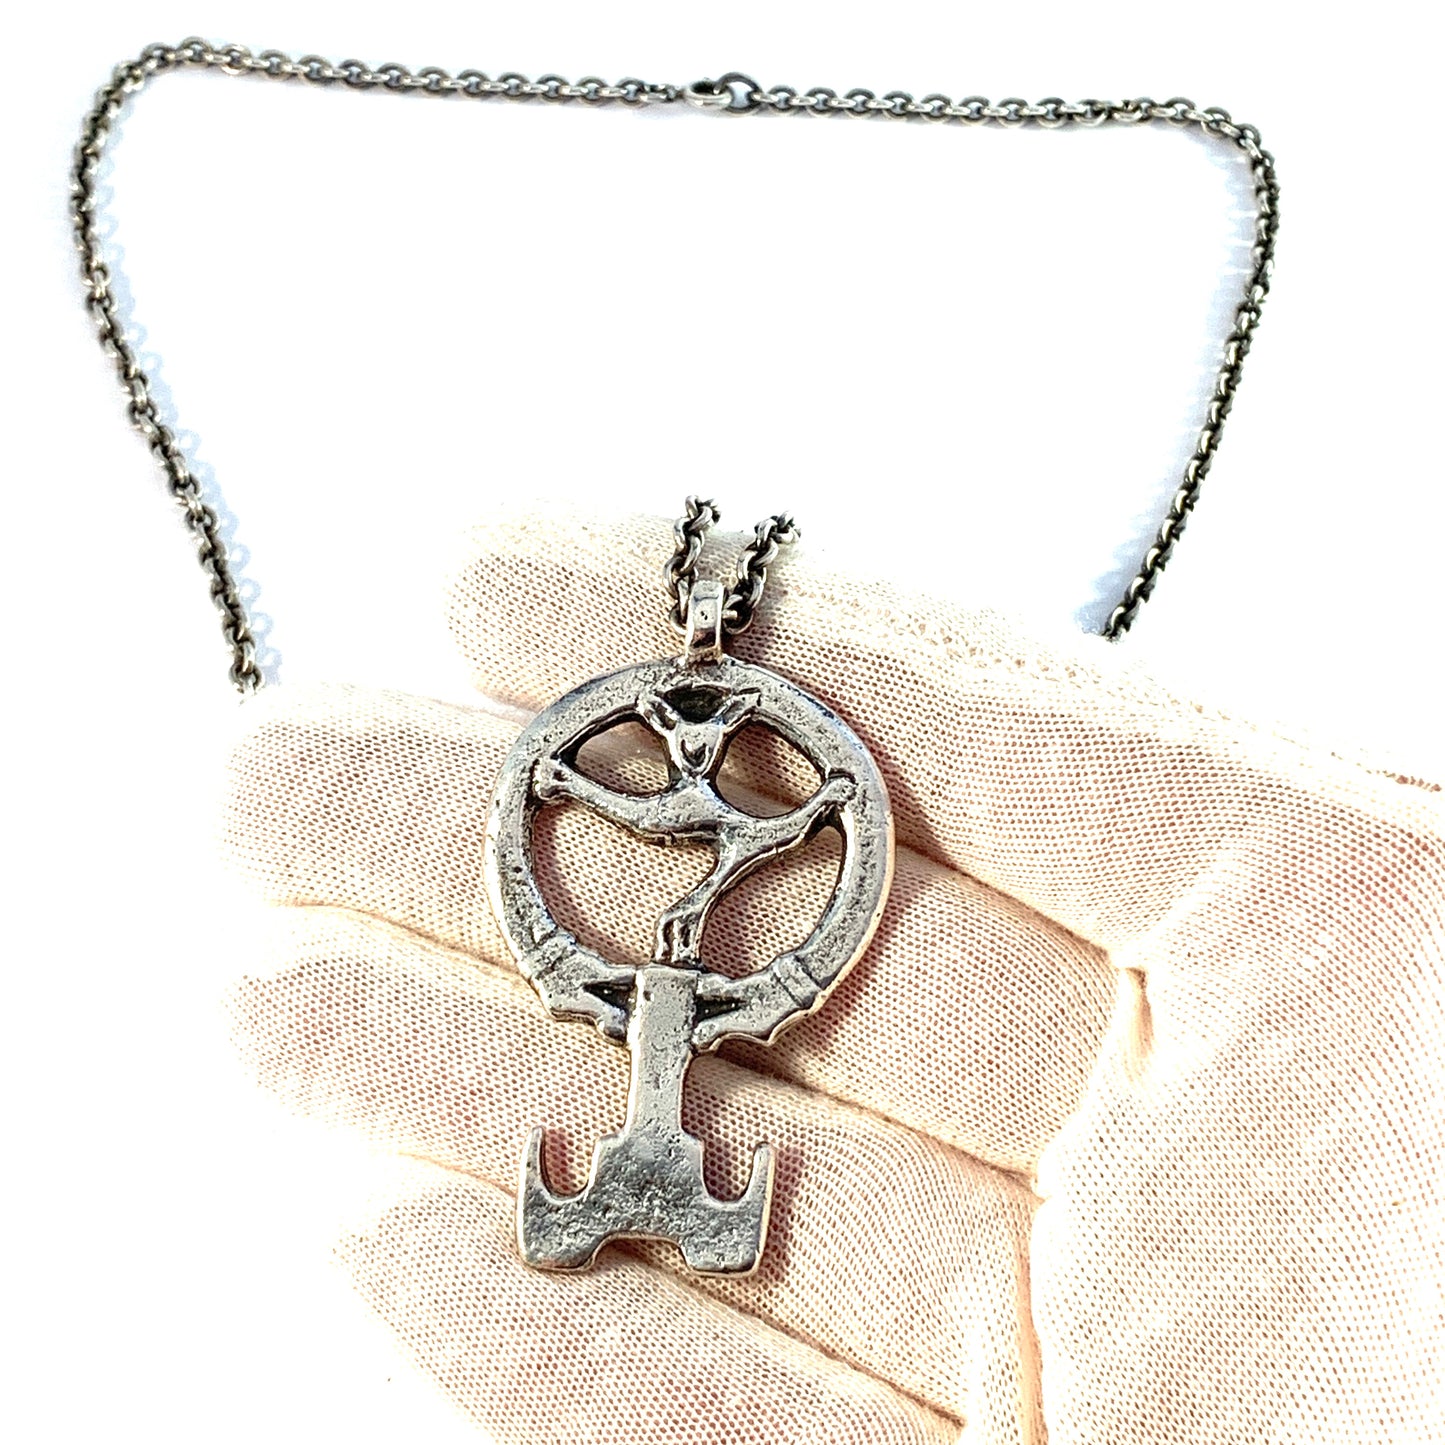 W A Bolin, Sweden 1970 Solid Silver Viking Copy Key to Valhalla Pendant Necklace